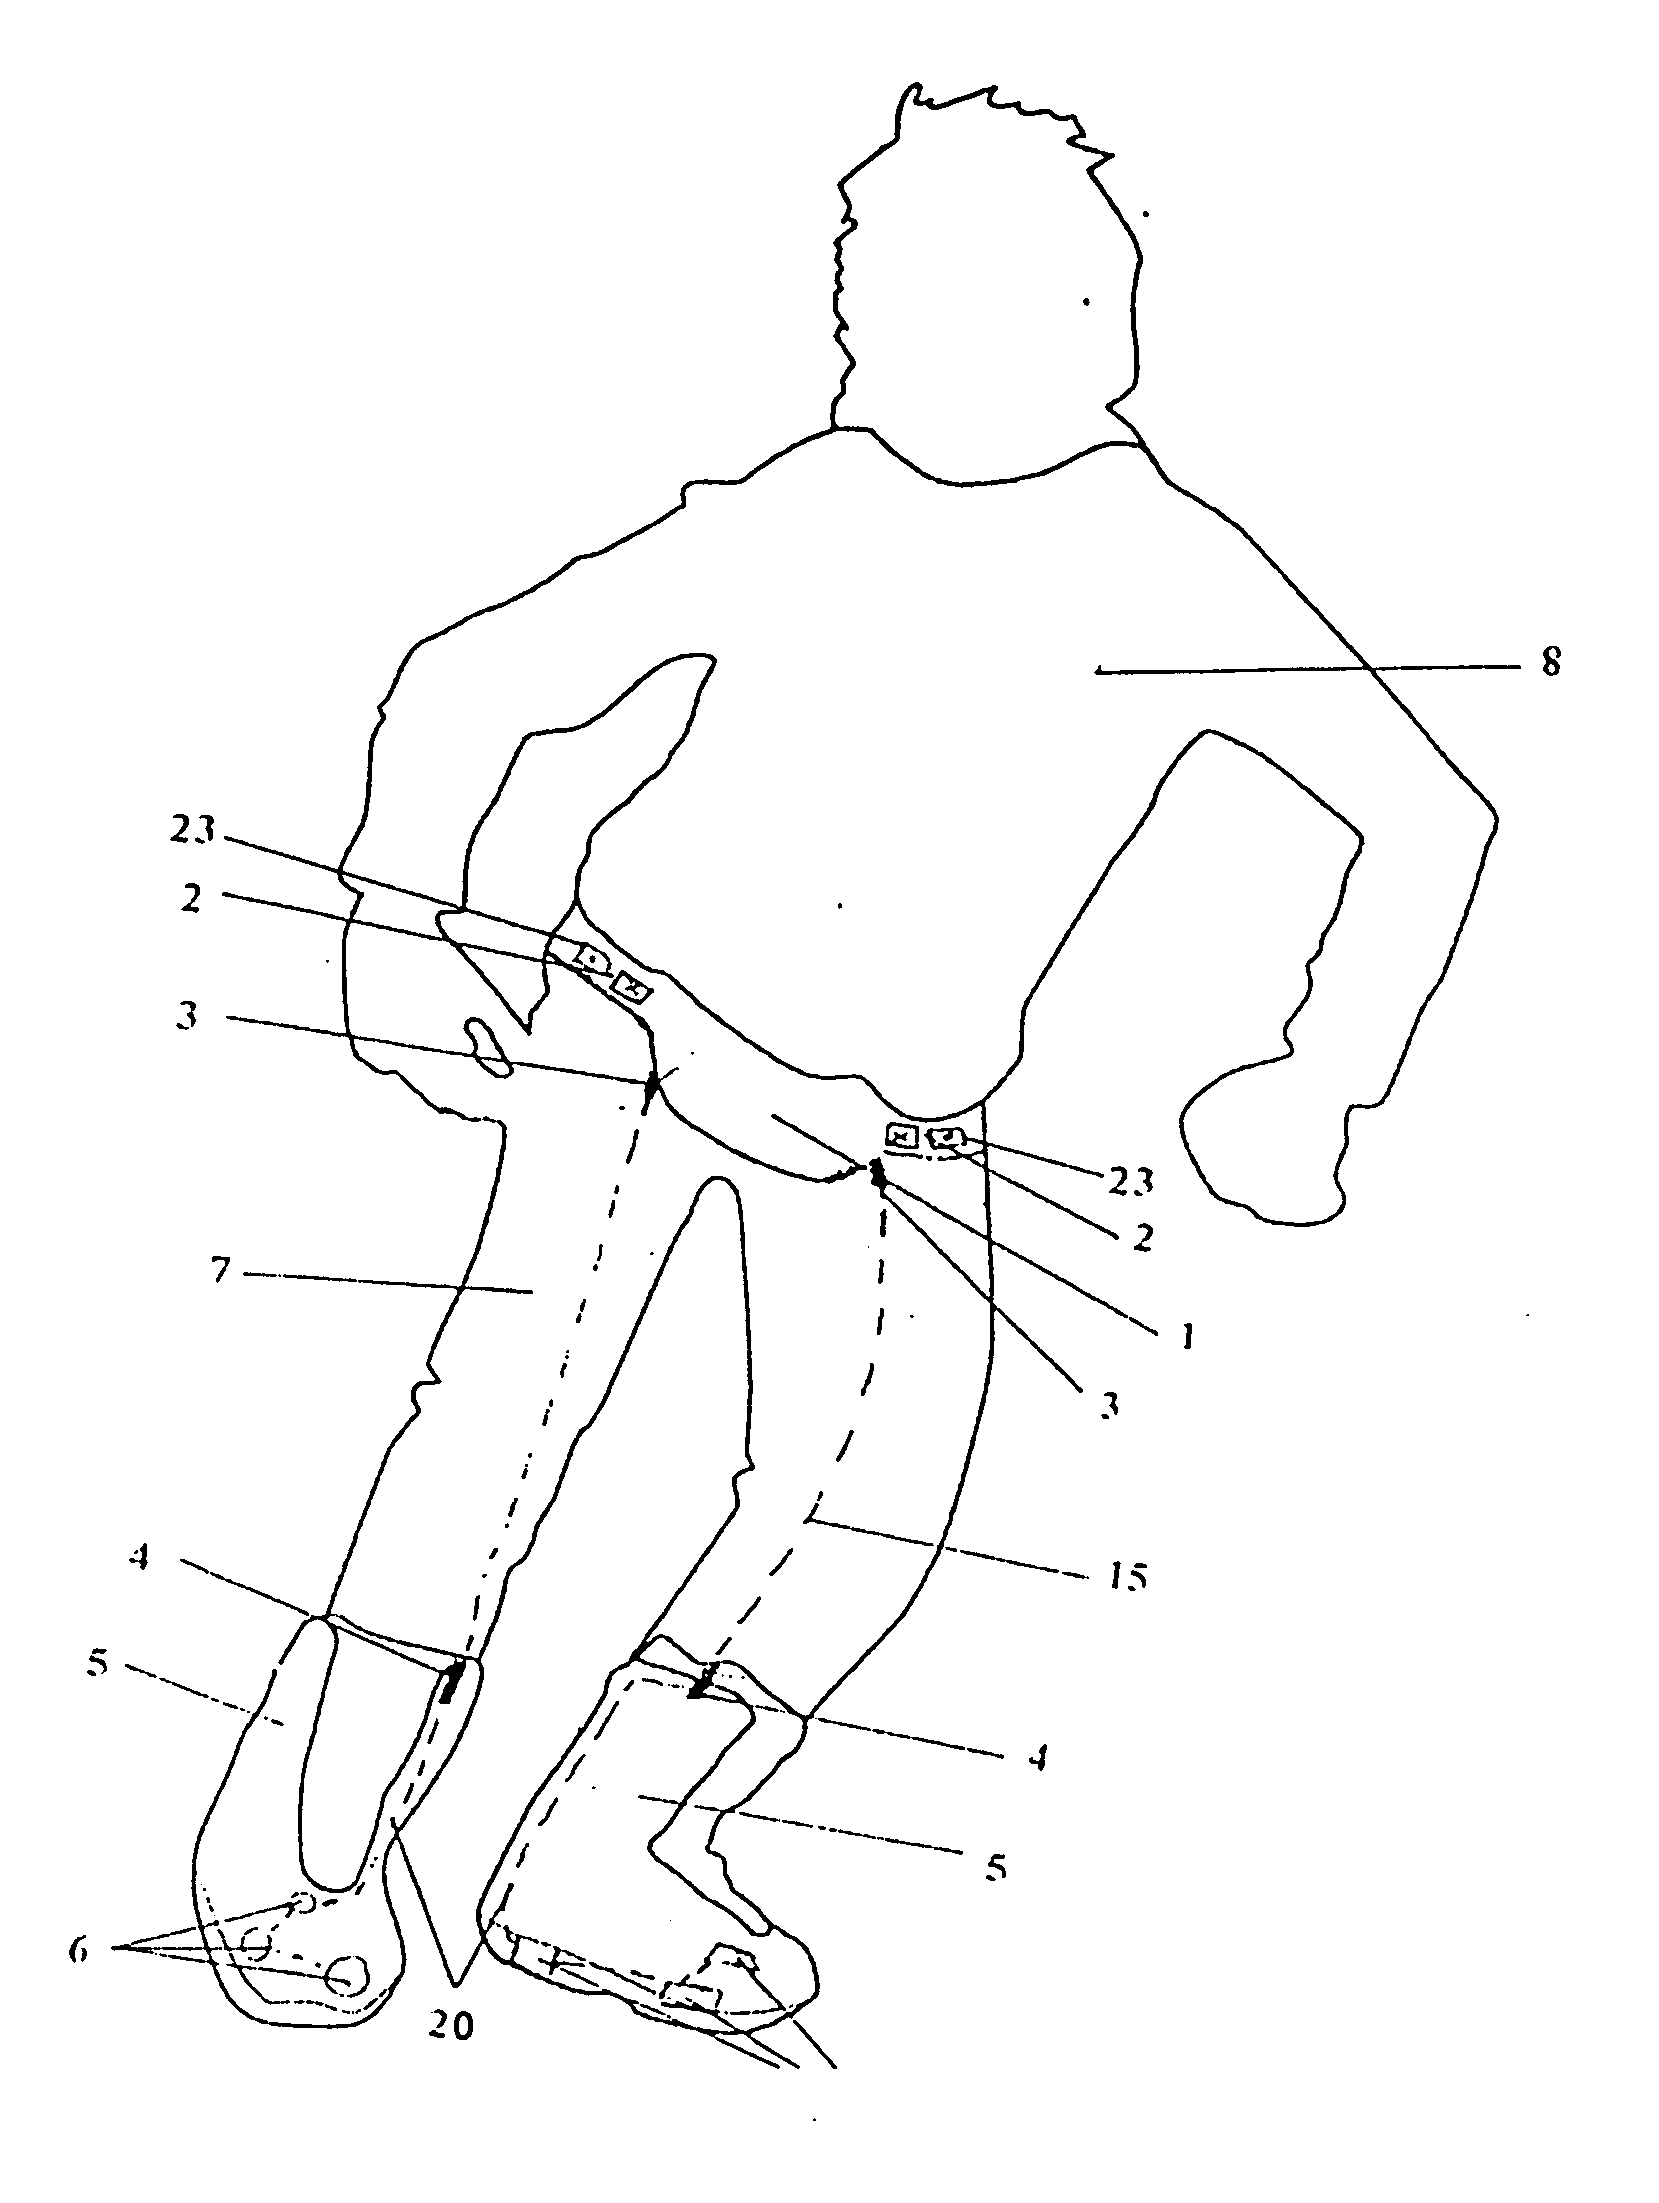 Autonomous electromagnetic control system for binding boots to a snowboard, skis, or similar